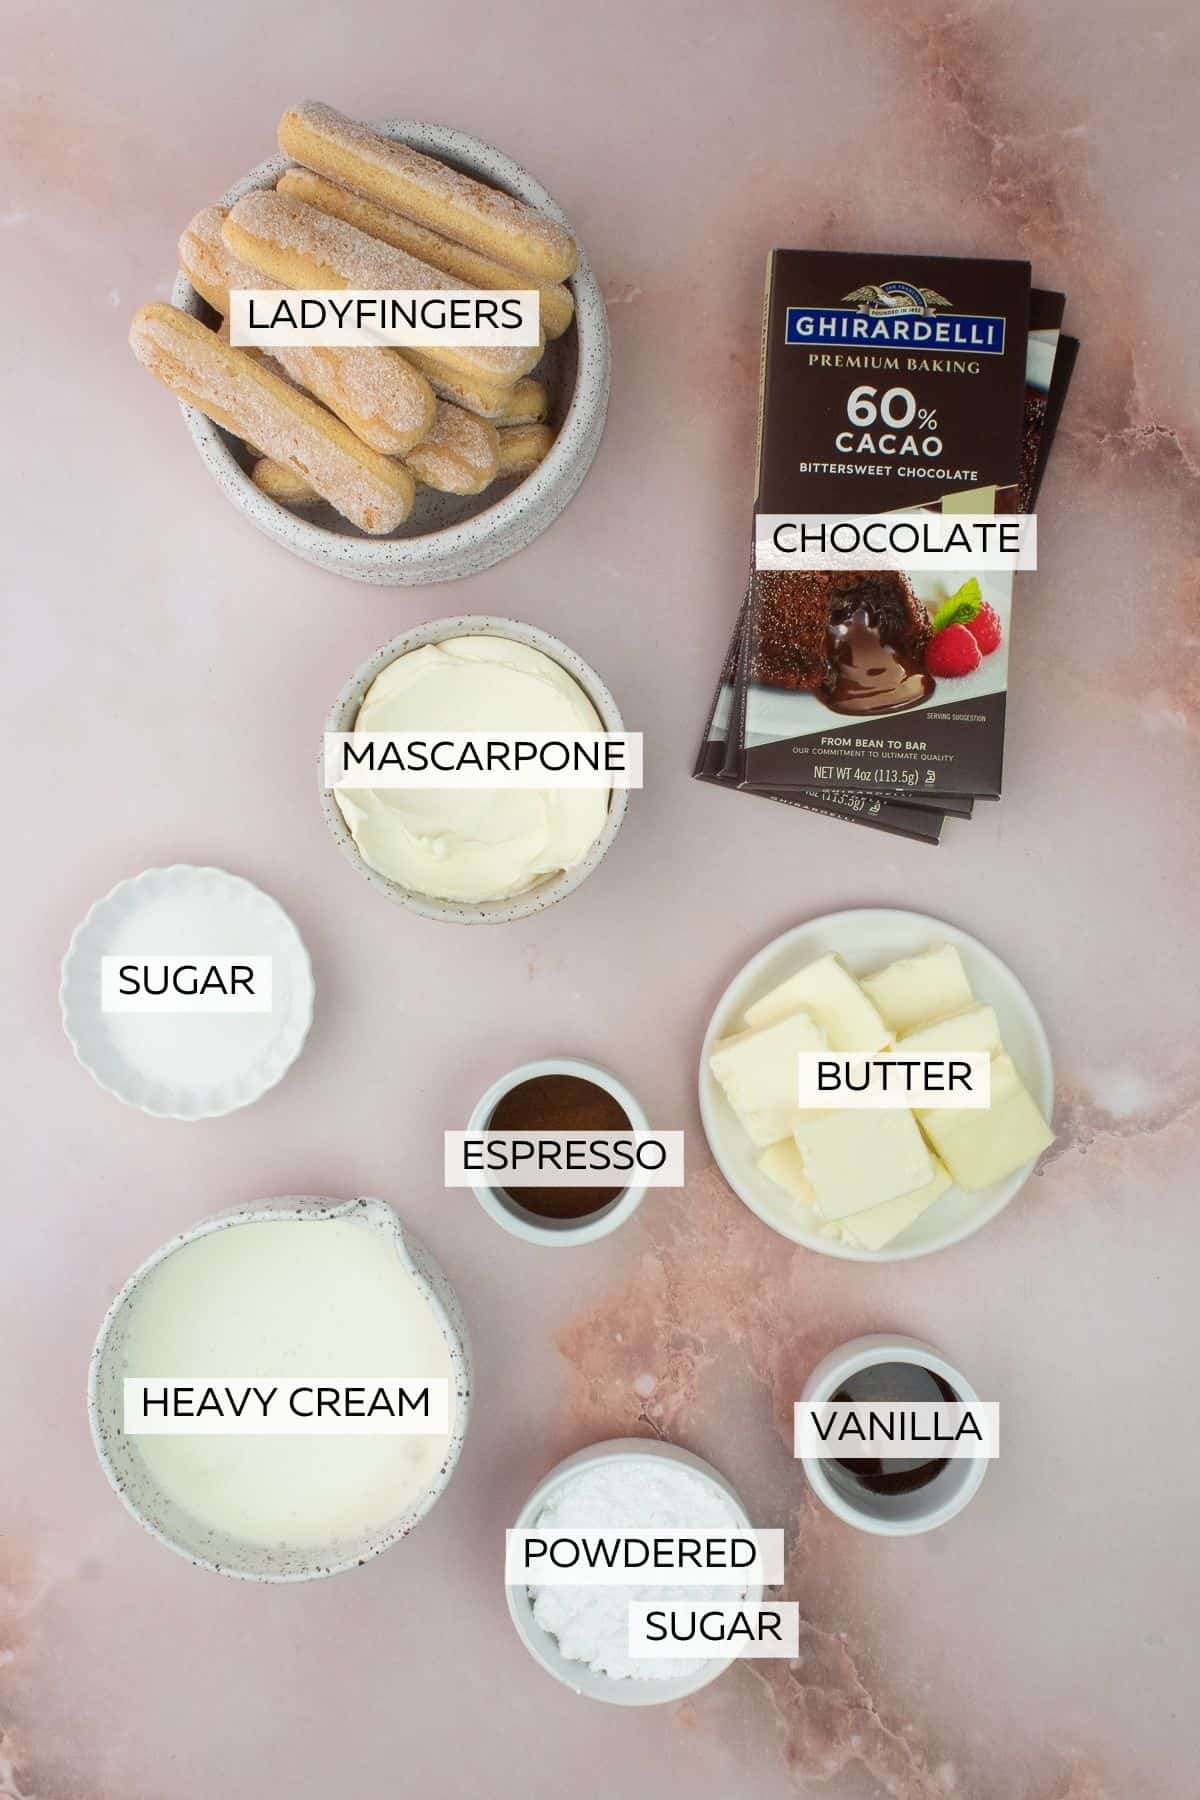 A photo of all 9 ingredients that are labeled